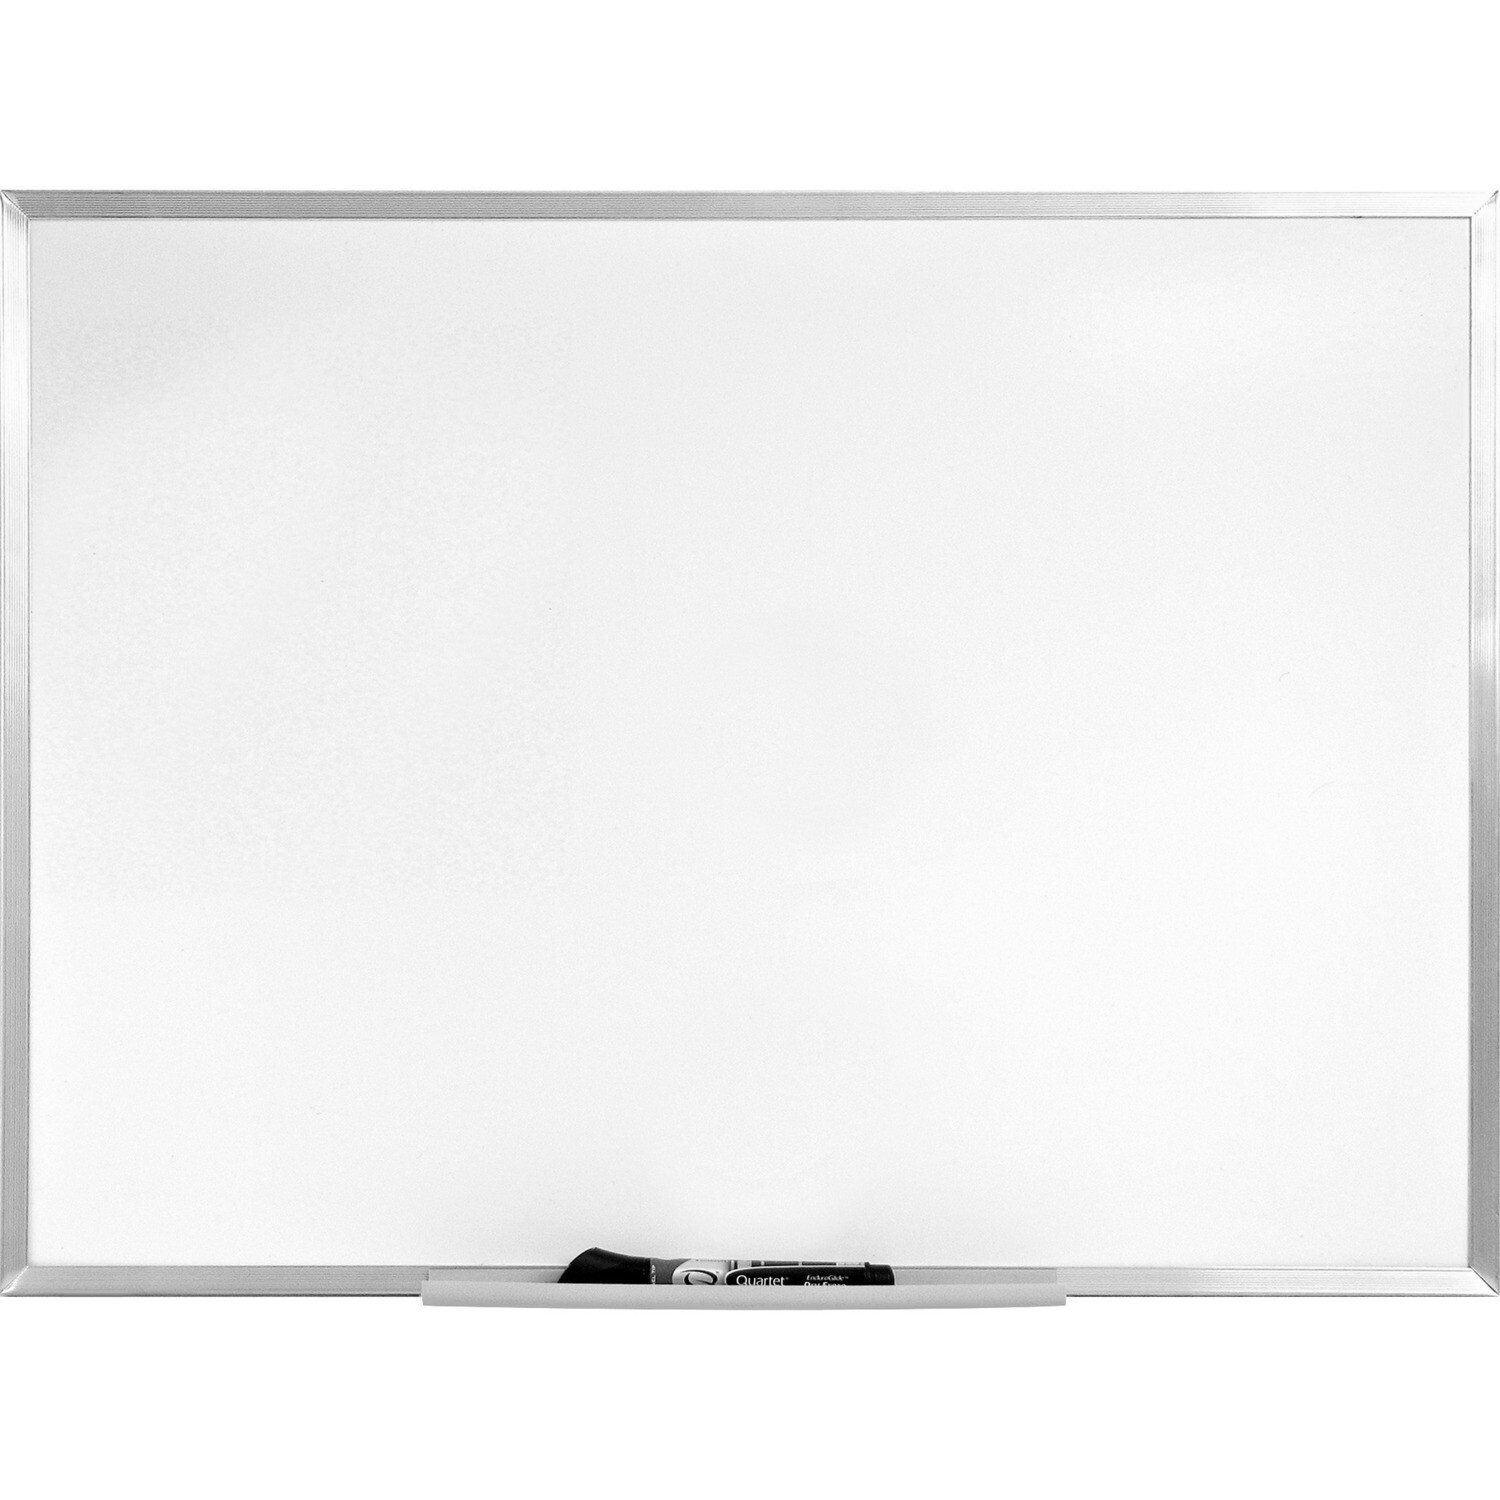 Whiteboard, 24" x 36" With Tray, Quartlet